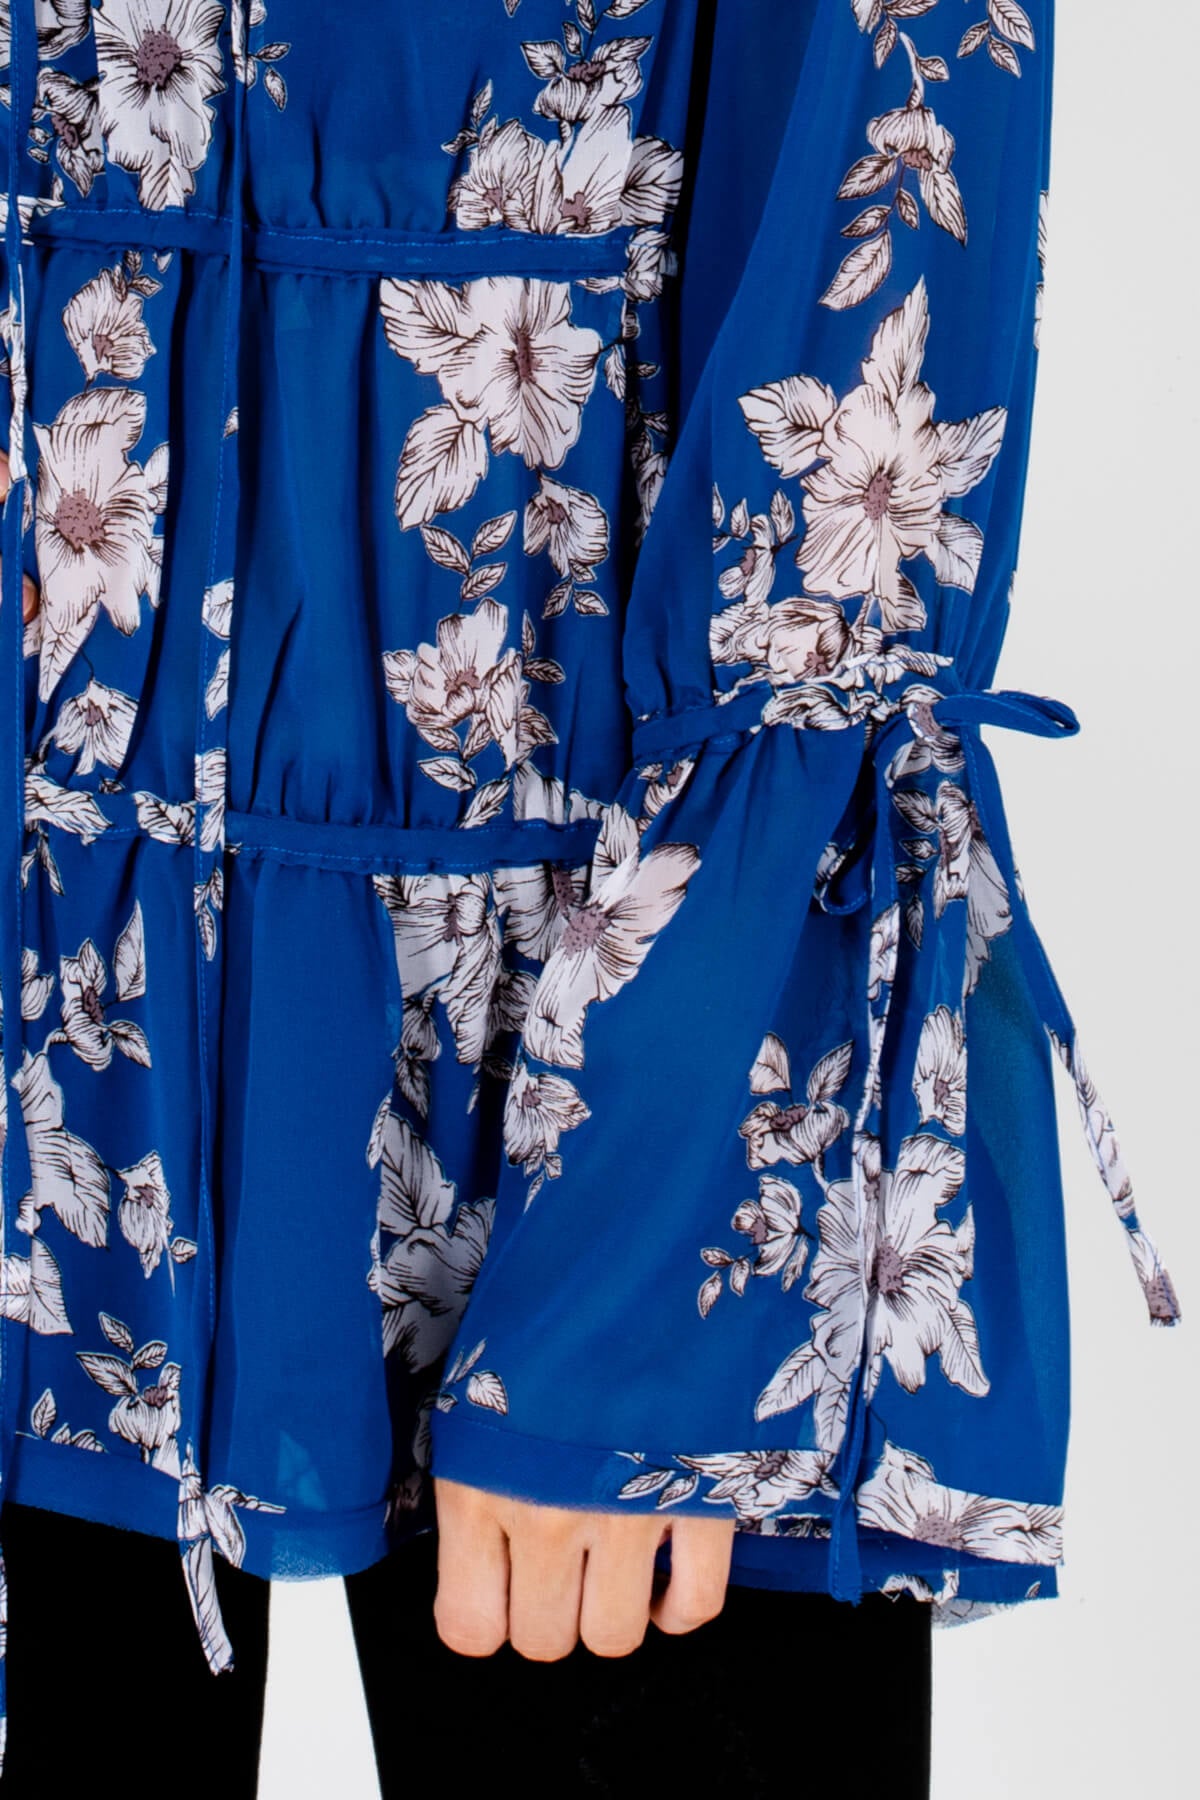 Royal Blue Floral Oversized Bohemian Tiered Blouses with Self-Tie Details